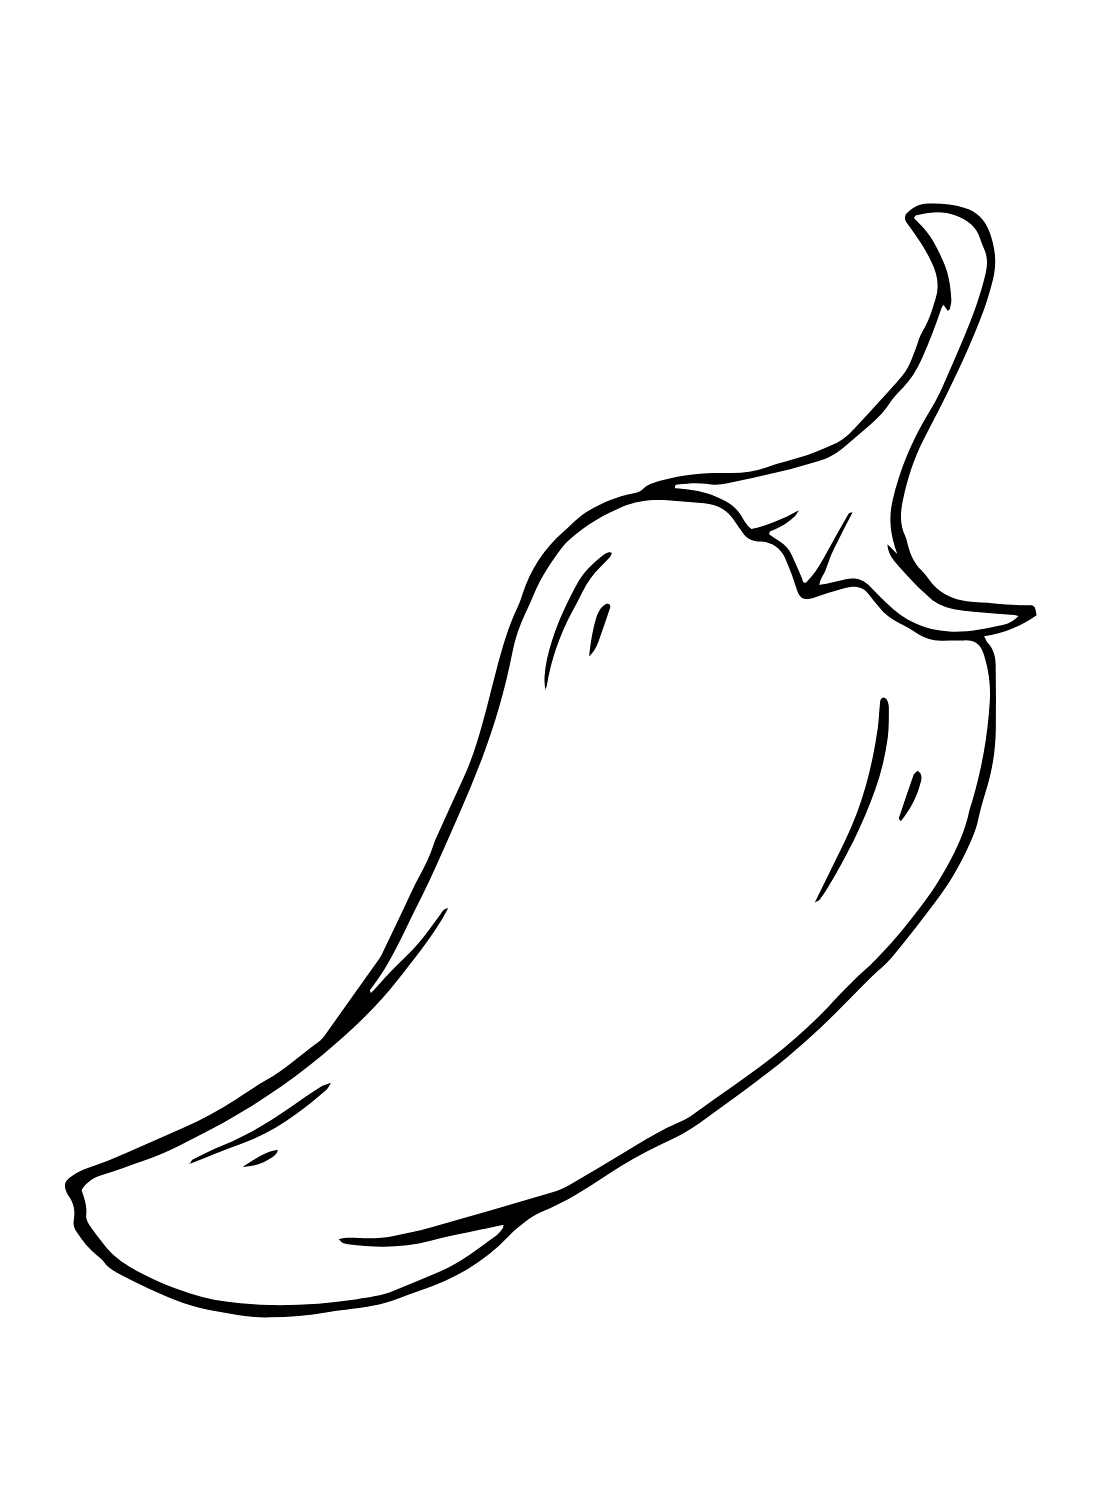 Chili Pepper to Print from Chili Pepper